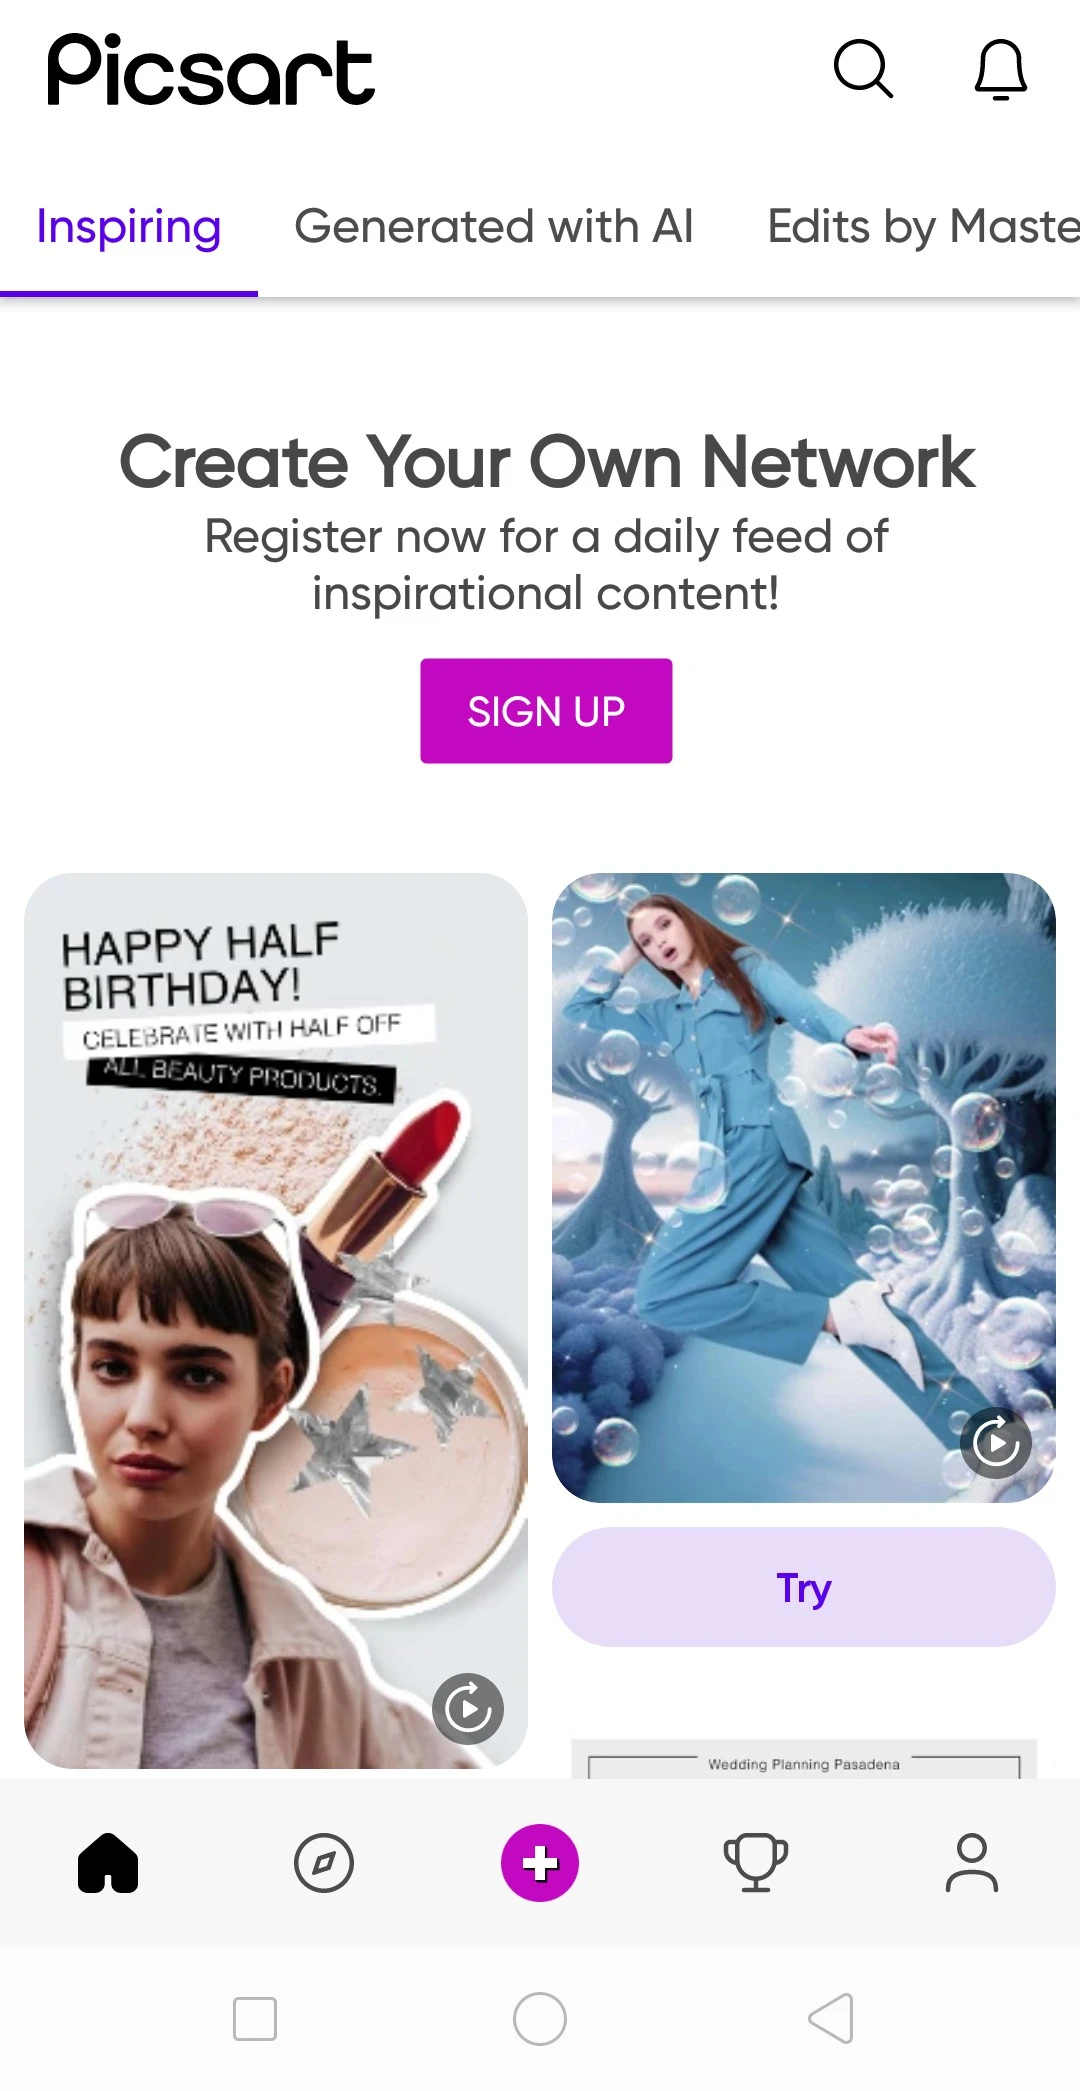 Sign Up method of the app